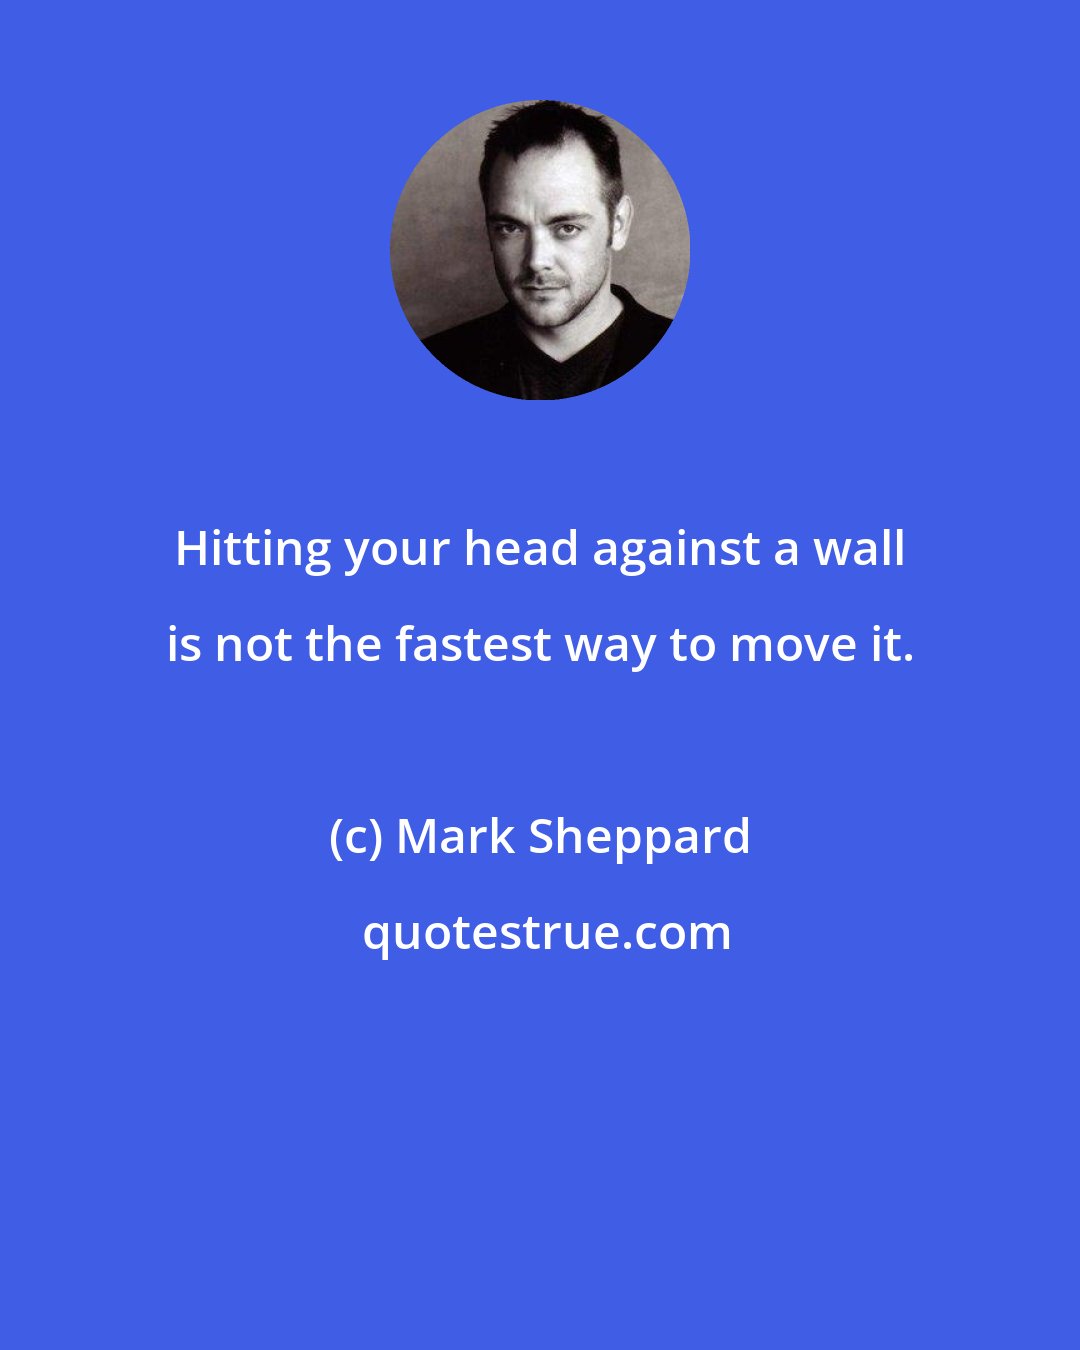 Mark Sheppard: Hitting your head against a wall is not the fastest way to move it.